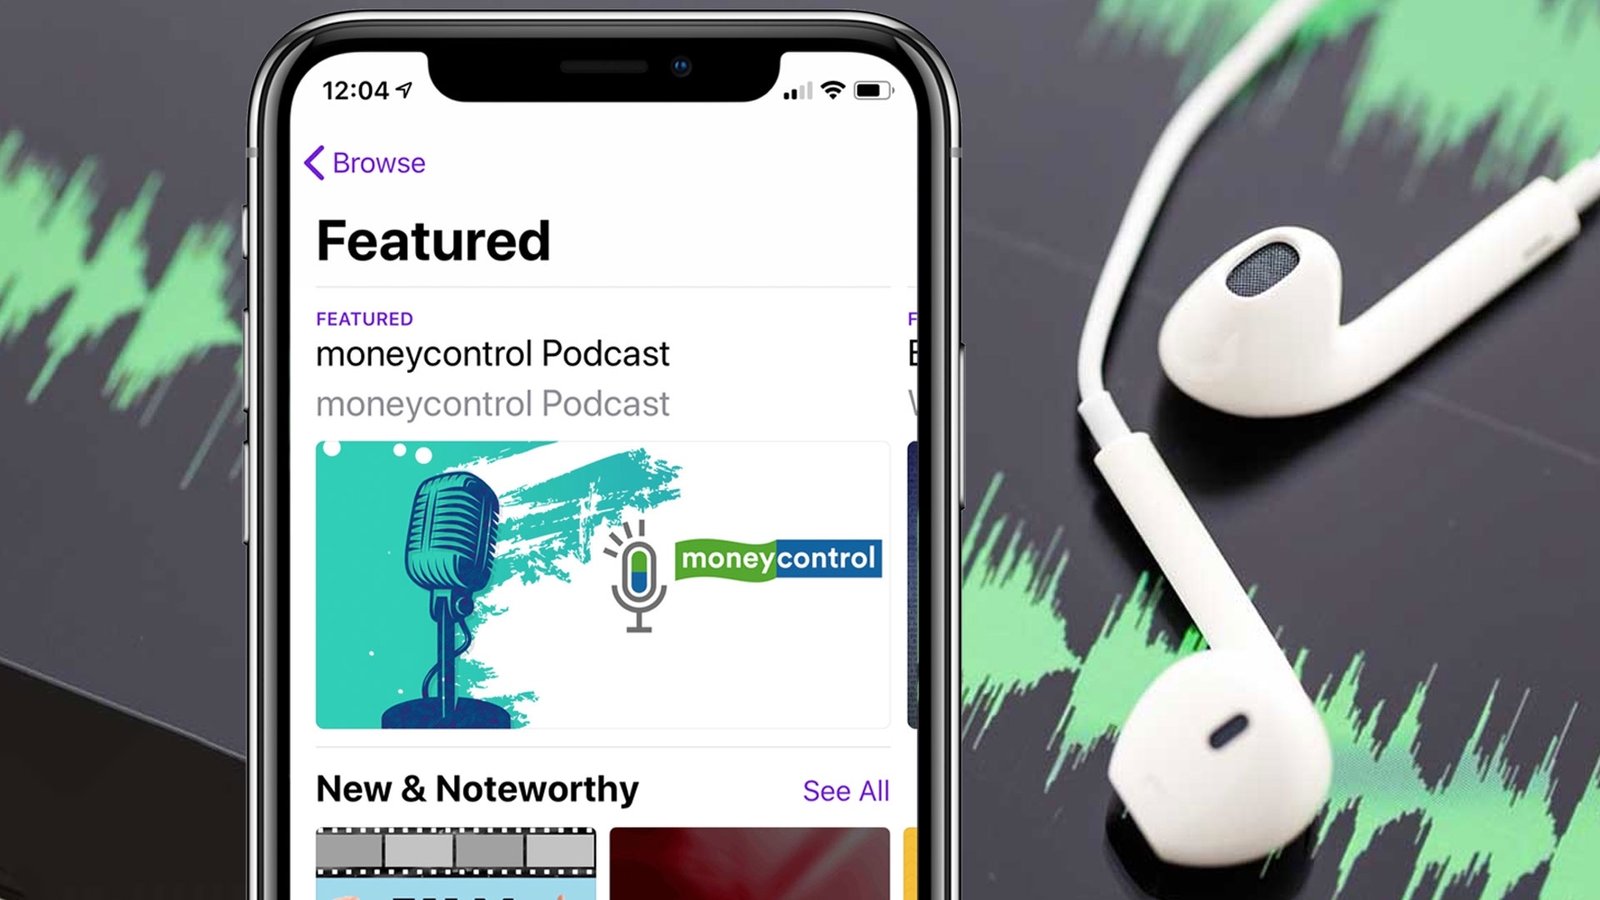 Podcasts perfect for the quarantine period